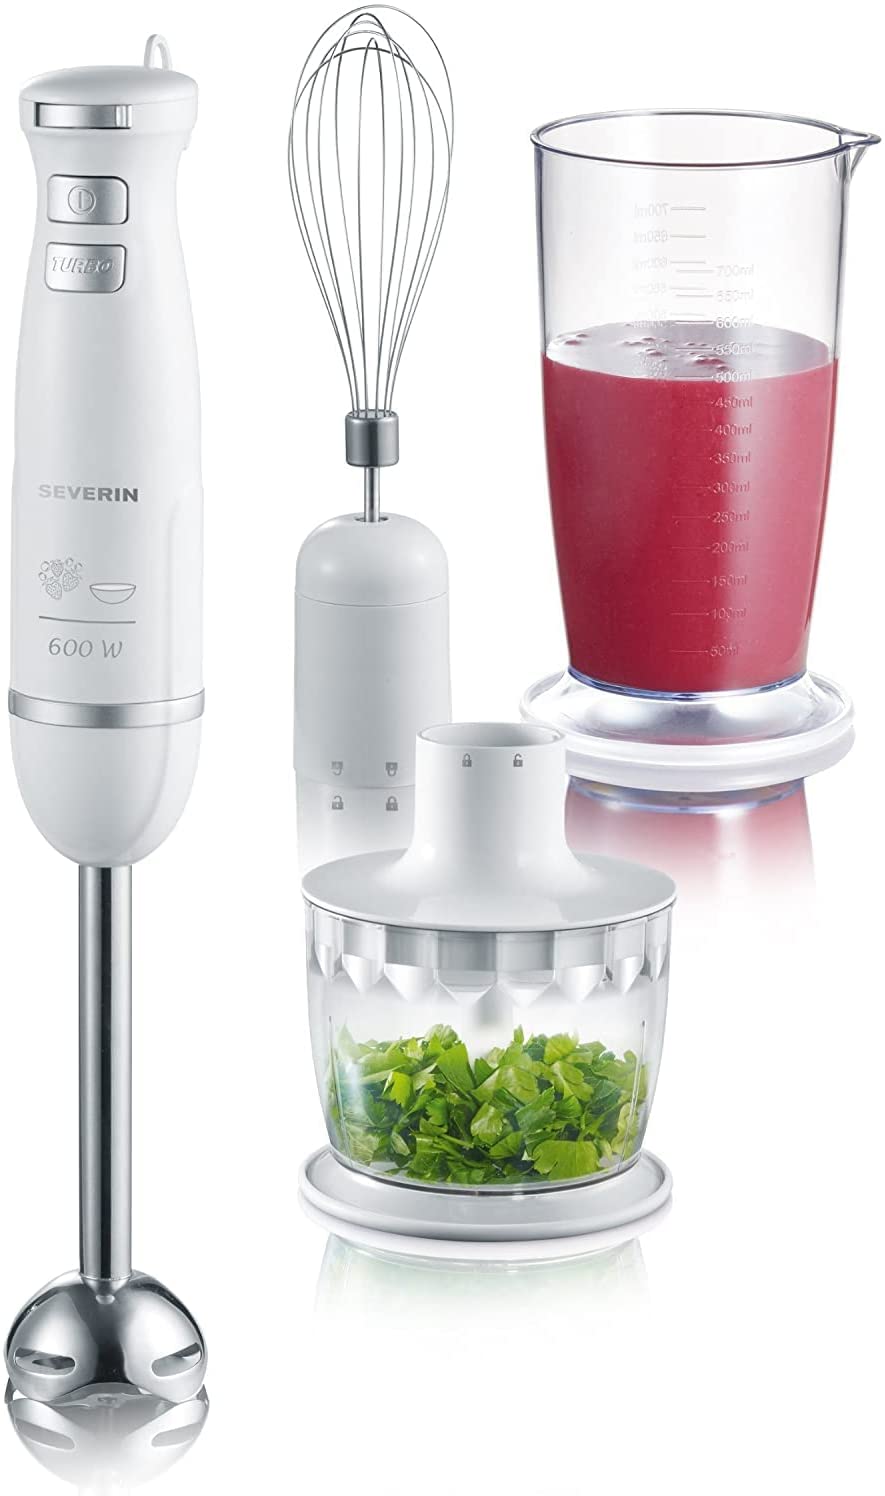 Severin Hand Blender Set, Approx. 600 W, Incl. SM 3798 Mixing Cup with Lid, Whisk, Wall Mount, Stainless Steel, White